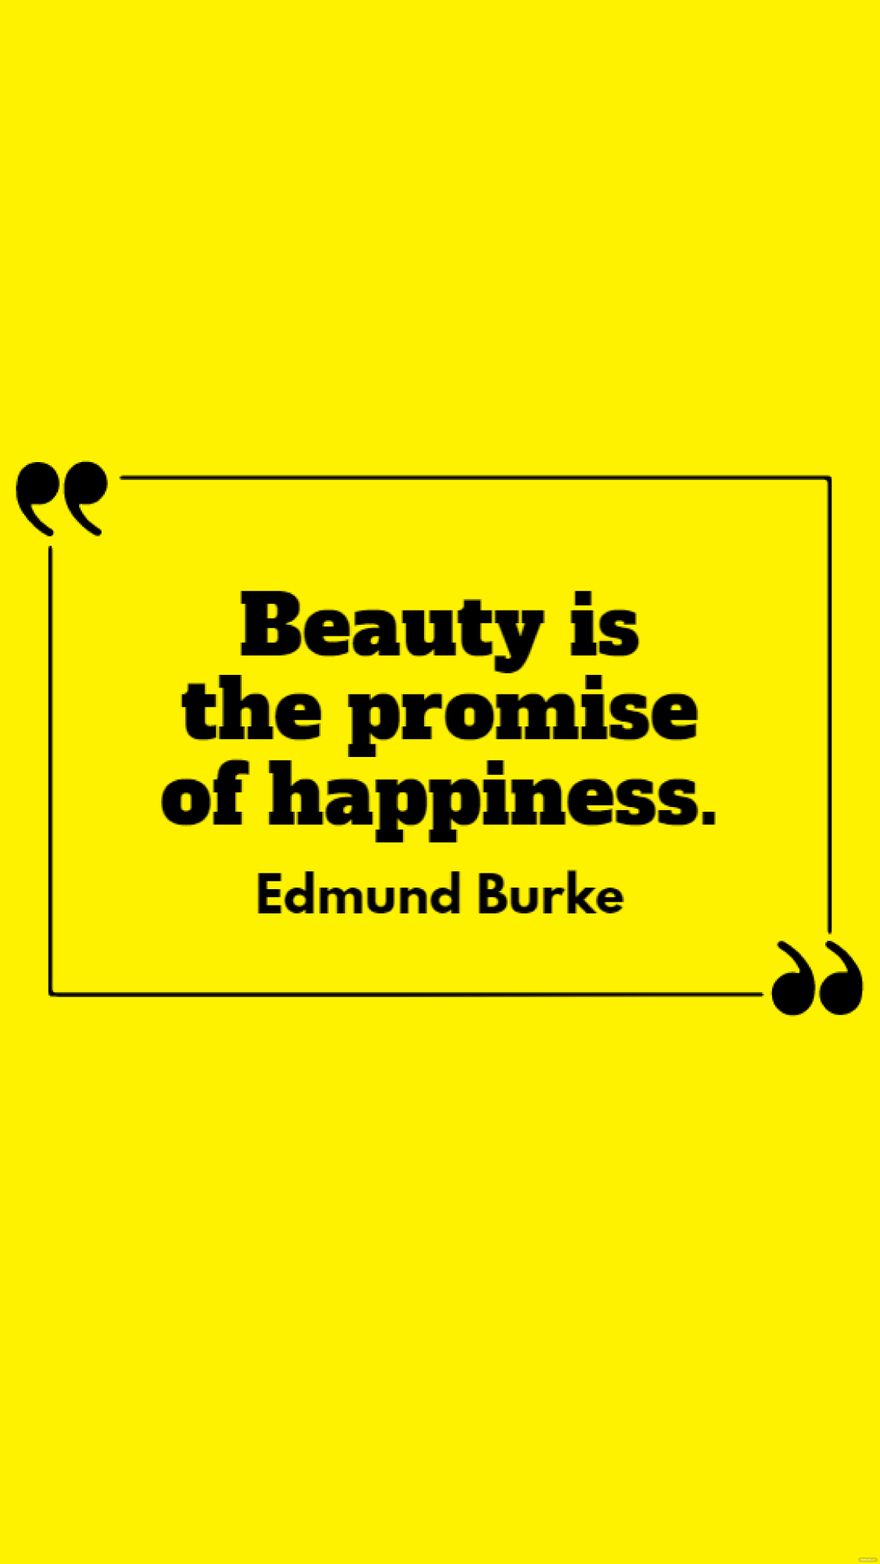 Free Edmund Burke - Beauty is the promise of happiness. in JPG